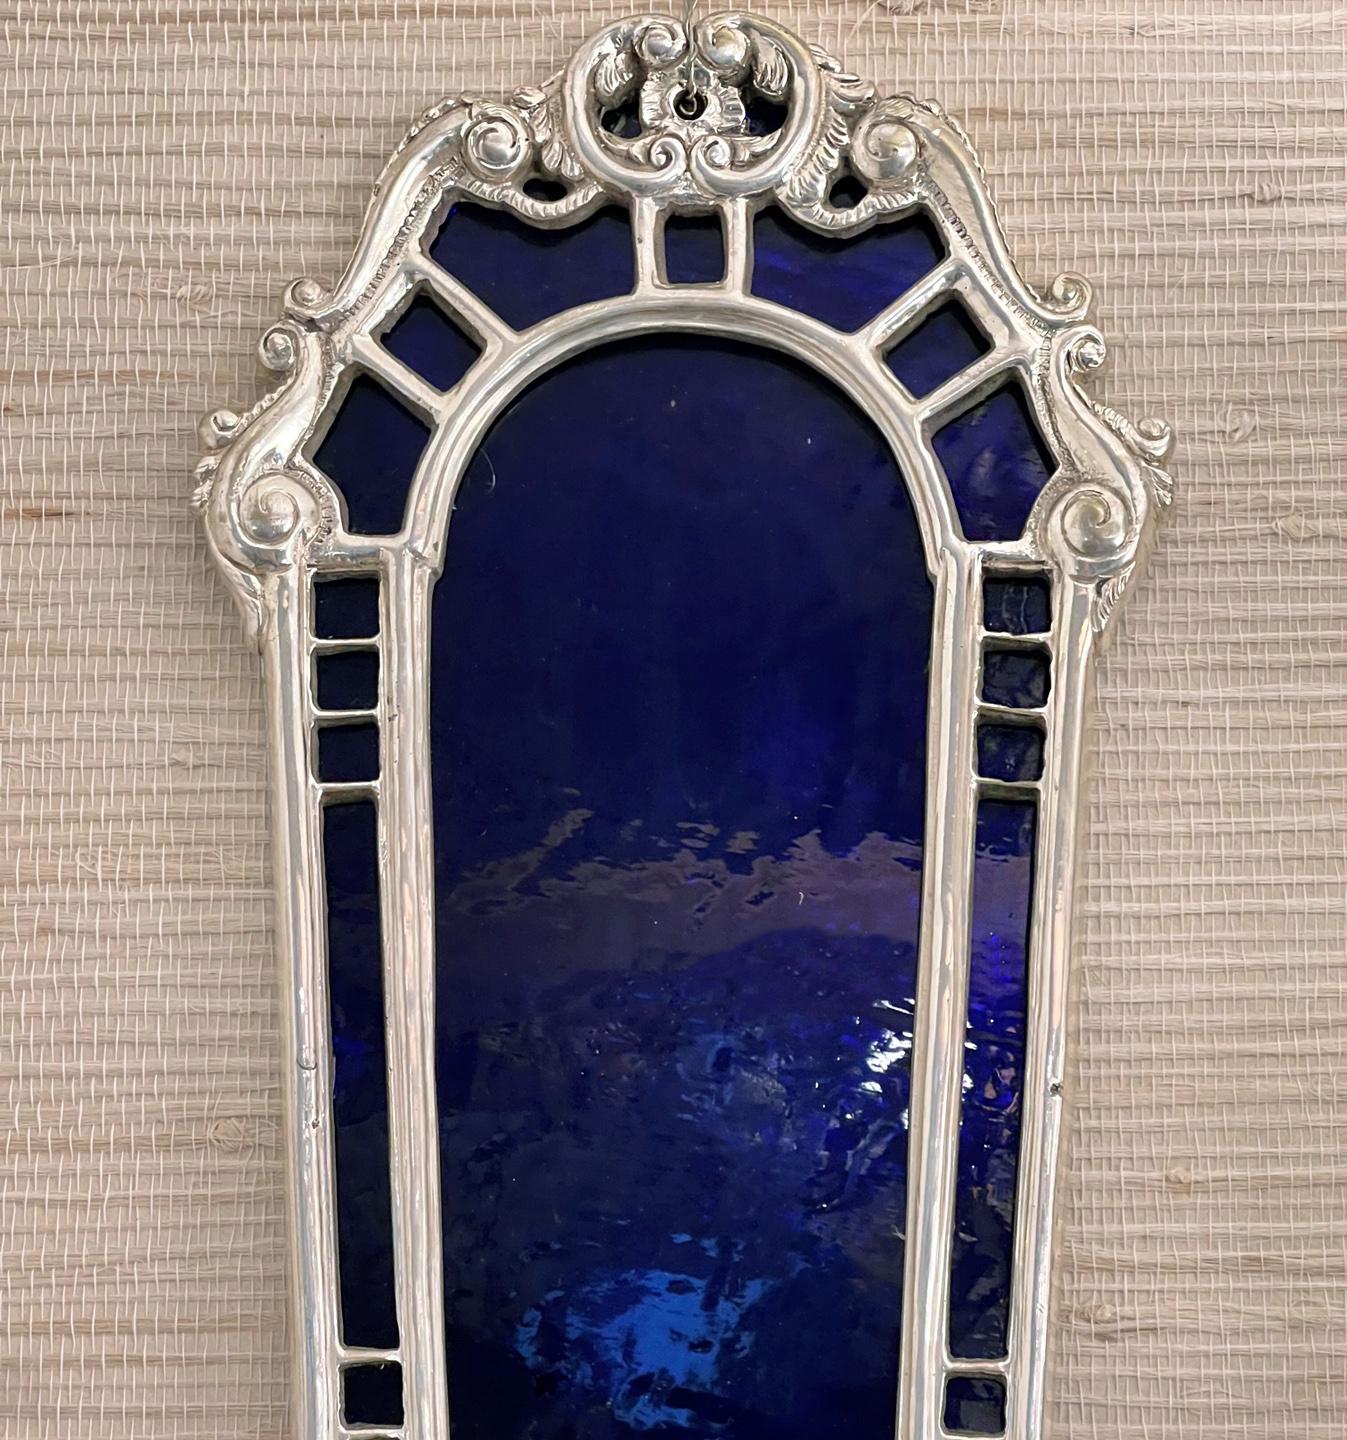 A set of ten circa 1920's American two-arm silver plated sconces with cobalt blue mirror on the frame. Sold per pair.

Measurements:
Height: 21.5